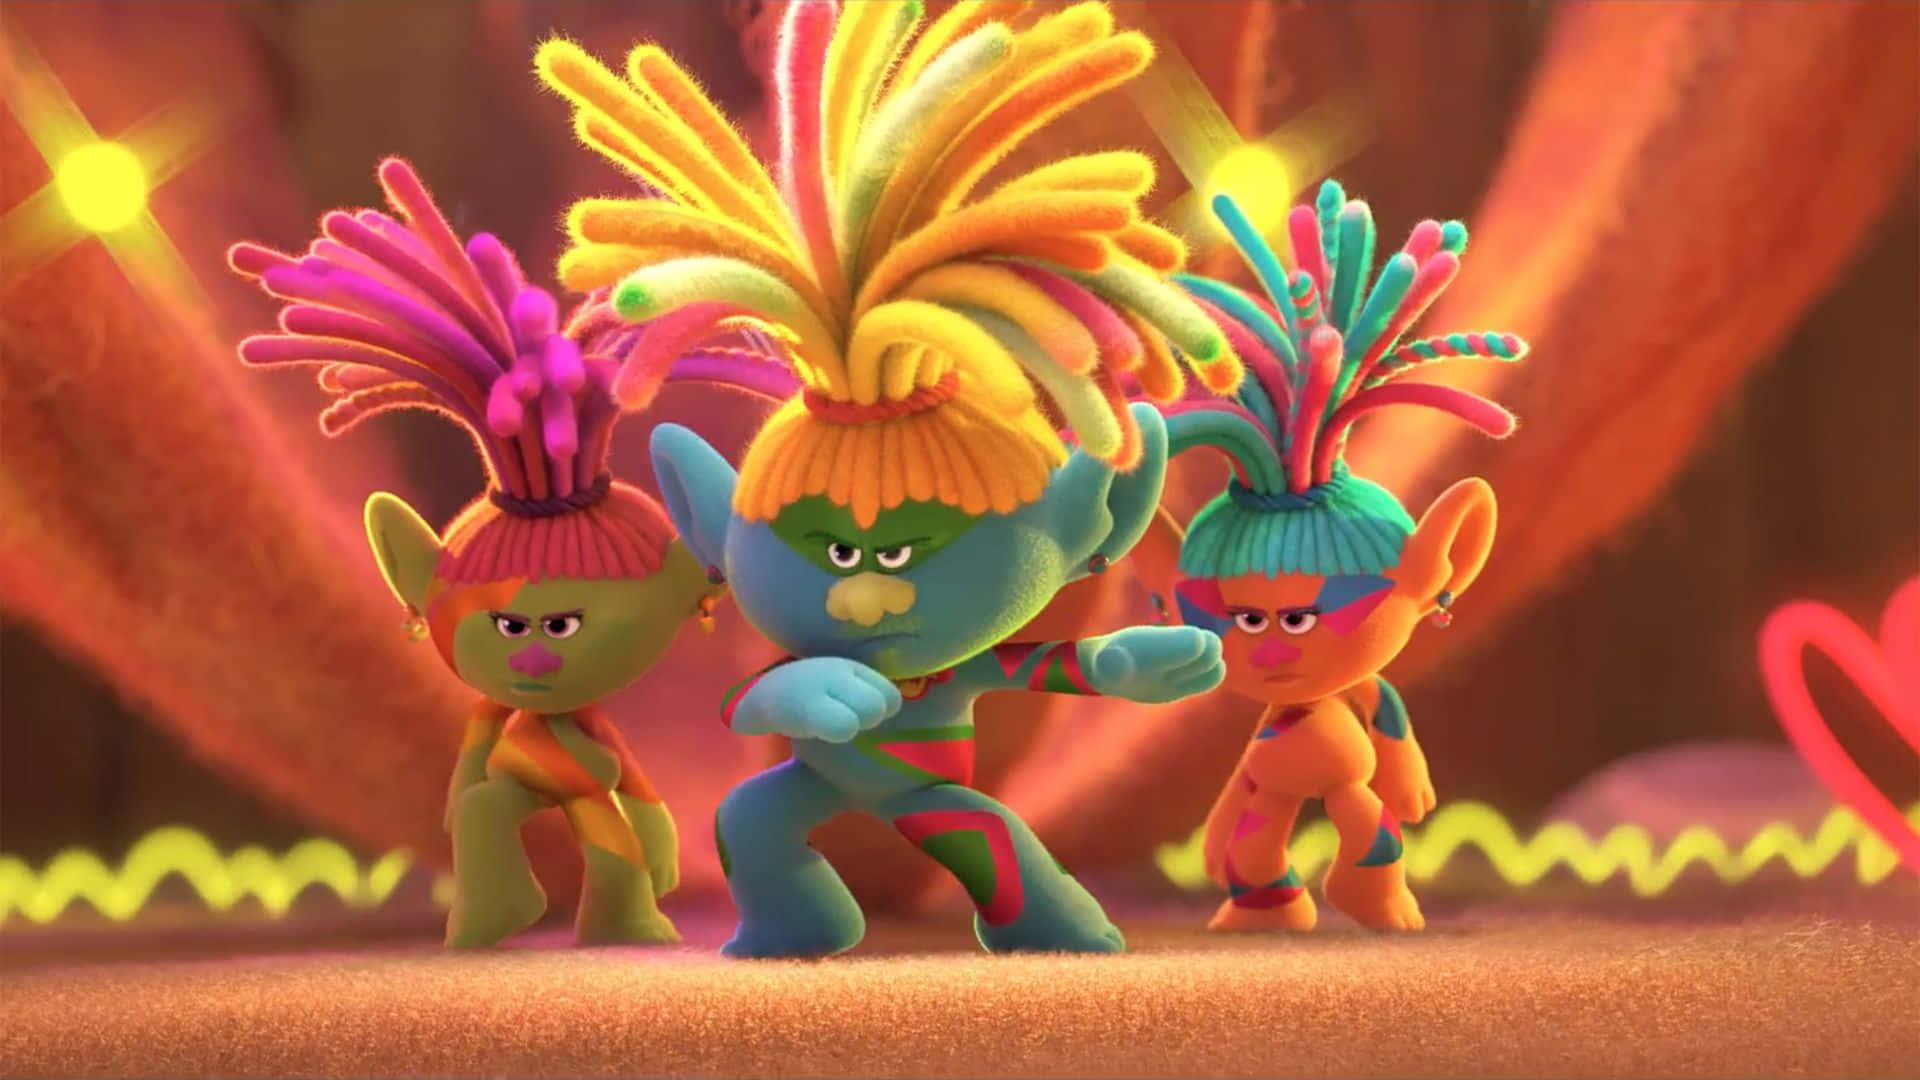 Dance your worries away with the Trolls!